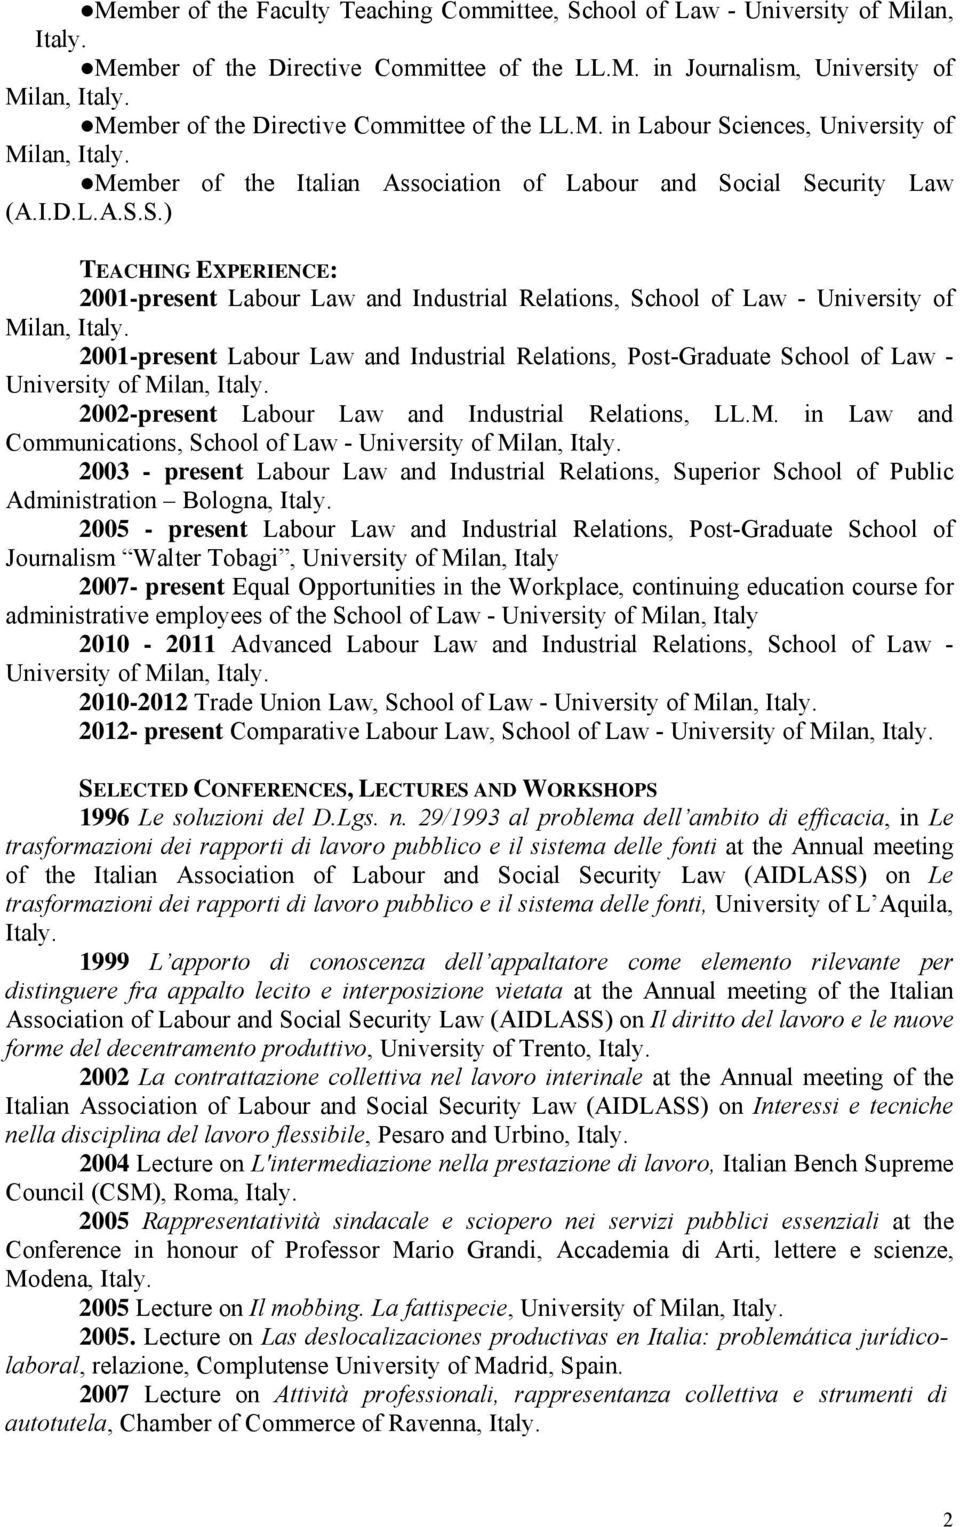 2001-present Labour Law and Industrial Relations, Post-Graduate School of Law - University of Milan, Italy. 2002-present Labour Law and Industrial Relations, LL.M. in Law and Communications, School of Law - University of Milan, Italy.